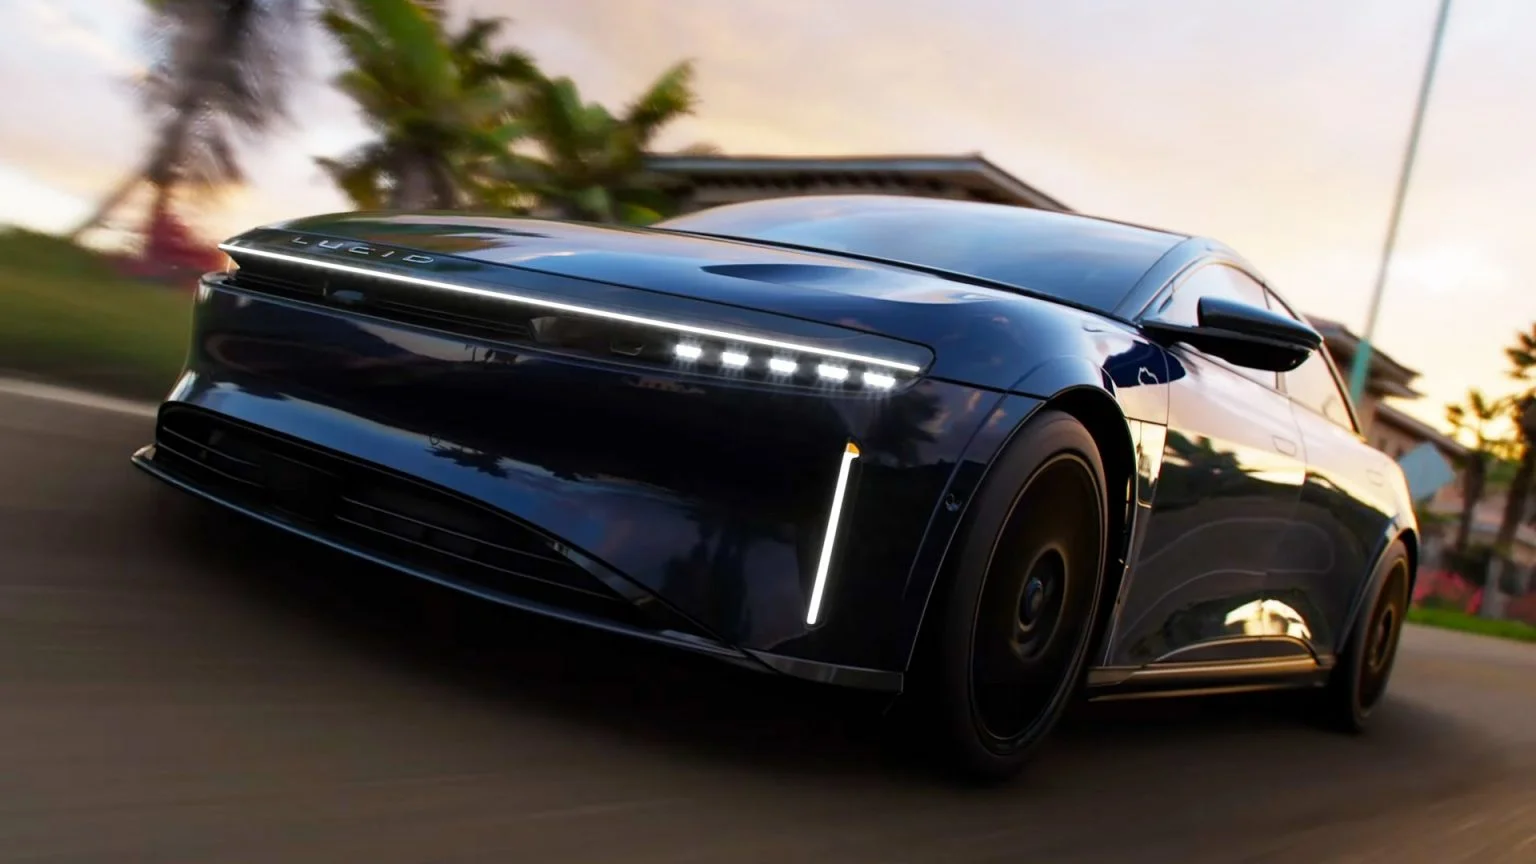 An electric sports car was shown in the new Forza Horizon 5 trailer